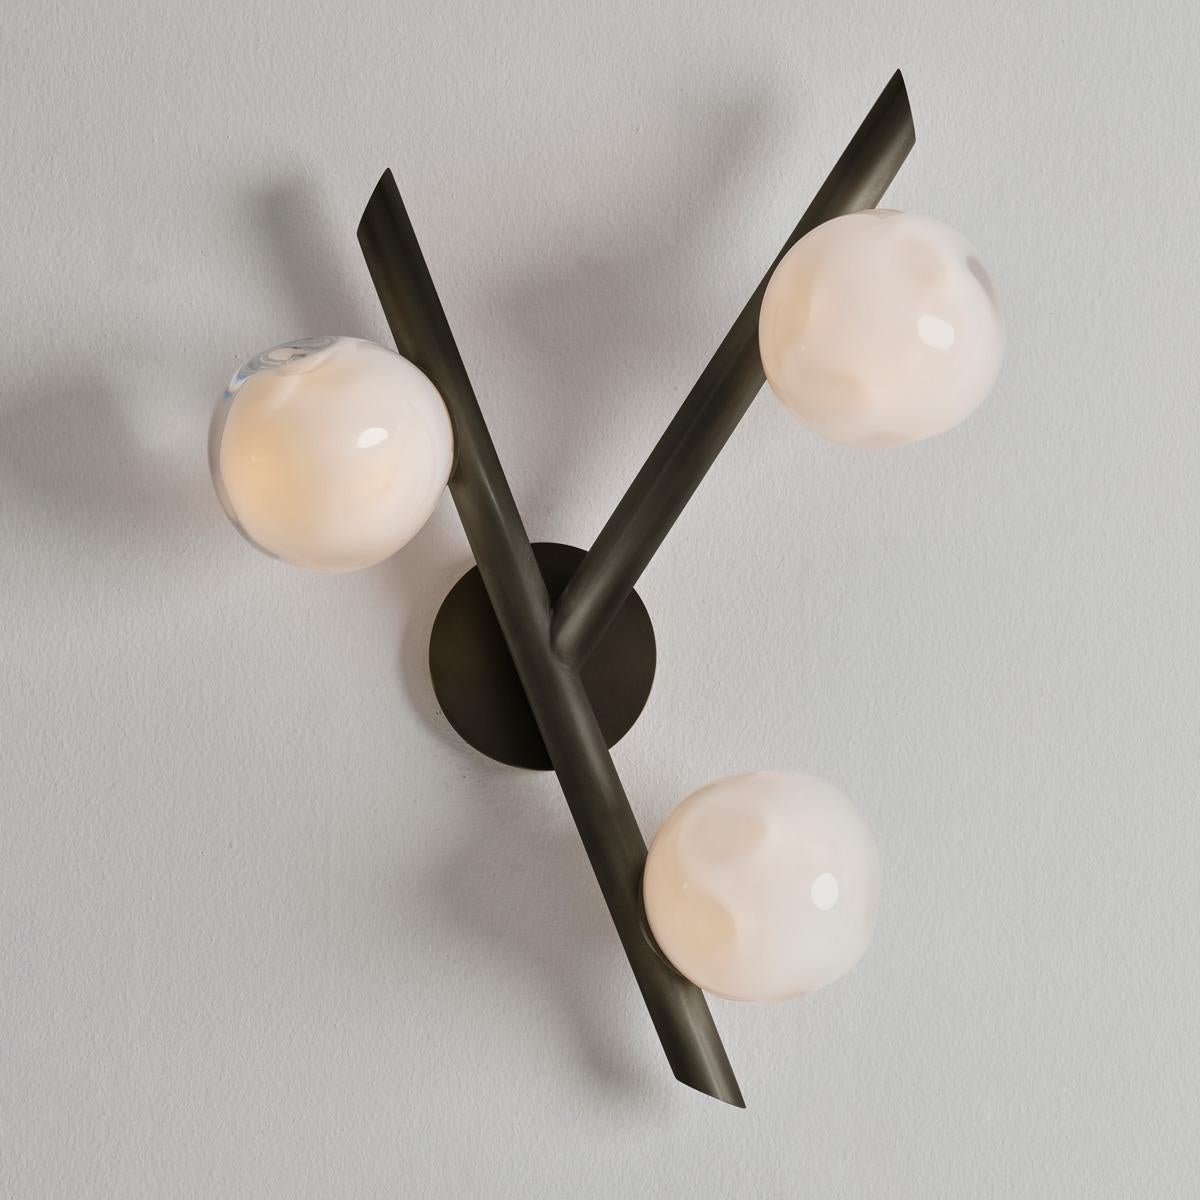 The Antares wall light harmoniously balances the linear details of its intersecting arms with the organic form of its handblown glass shades. The first images show the fixture in our Brunito Nero (Black bronze) finish-subsequent pictures show it in